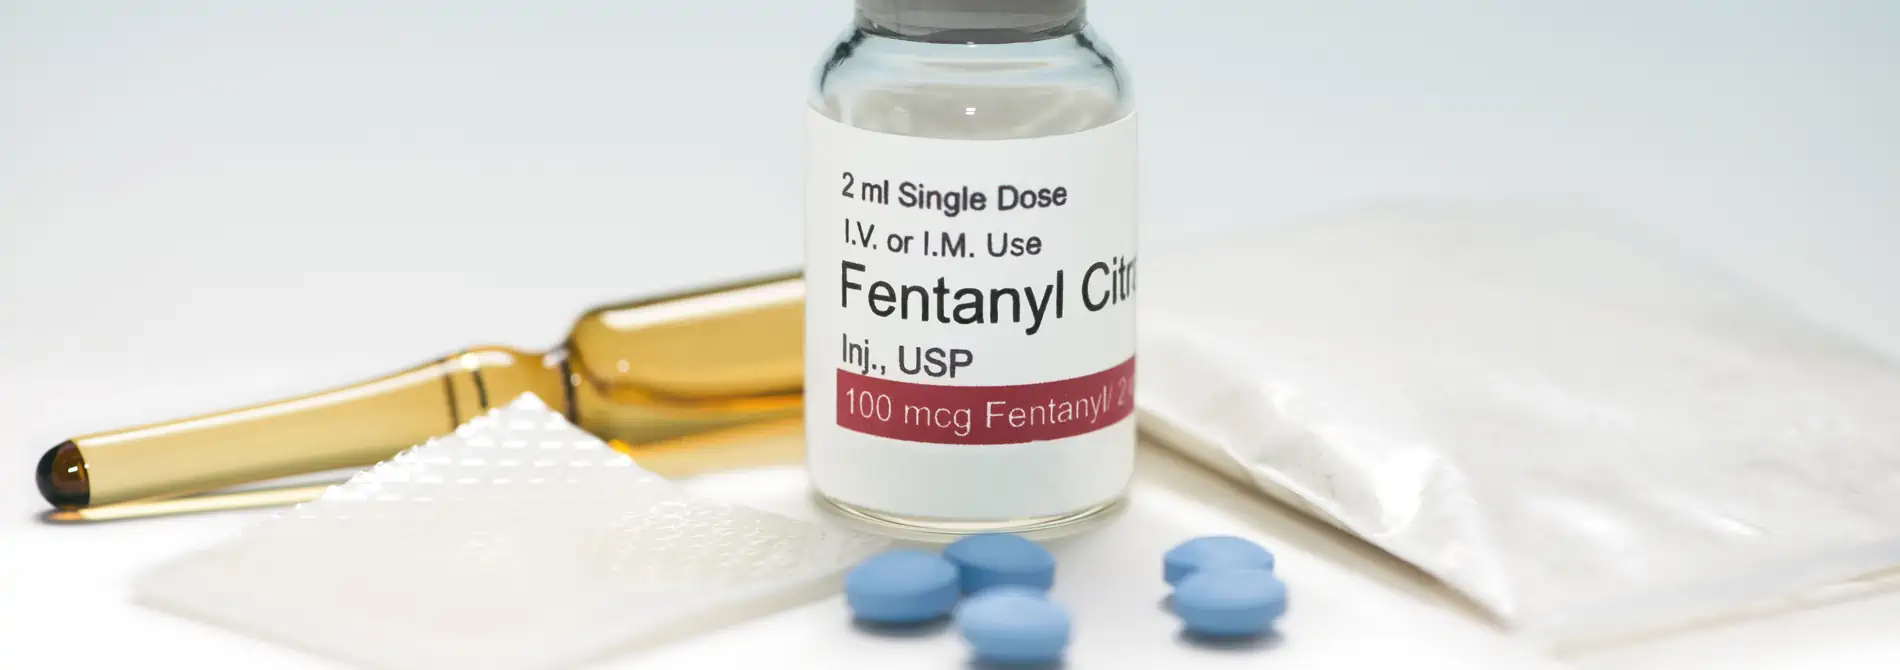 UF scientists discover way to alter fentanyl, making the potent pain  reliever safer - UF Health